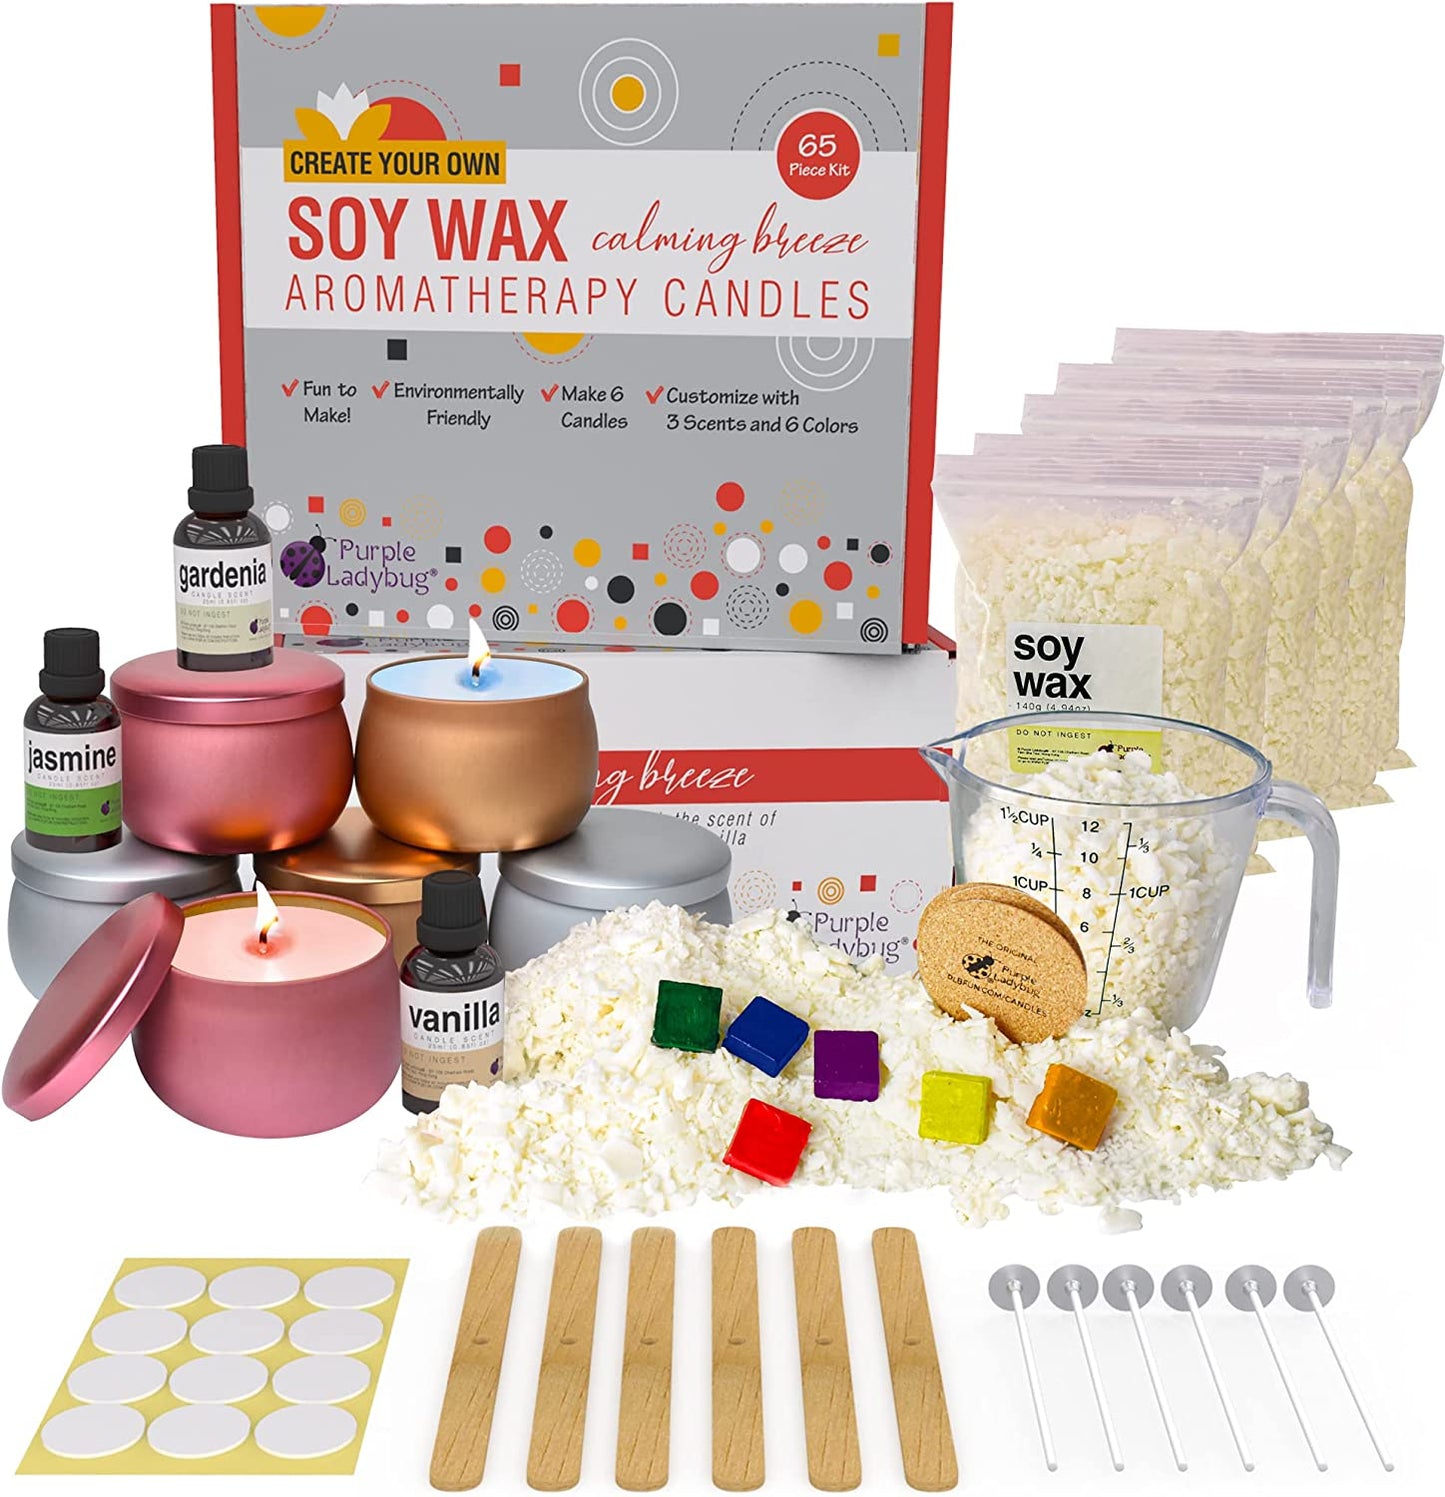 Shine bright with the 27 best candle making kits in 2024 - Gathered